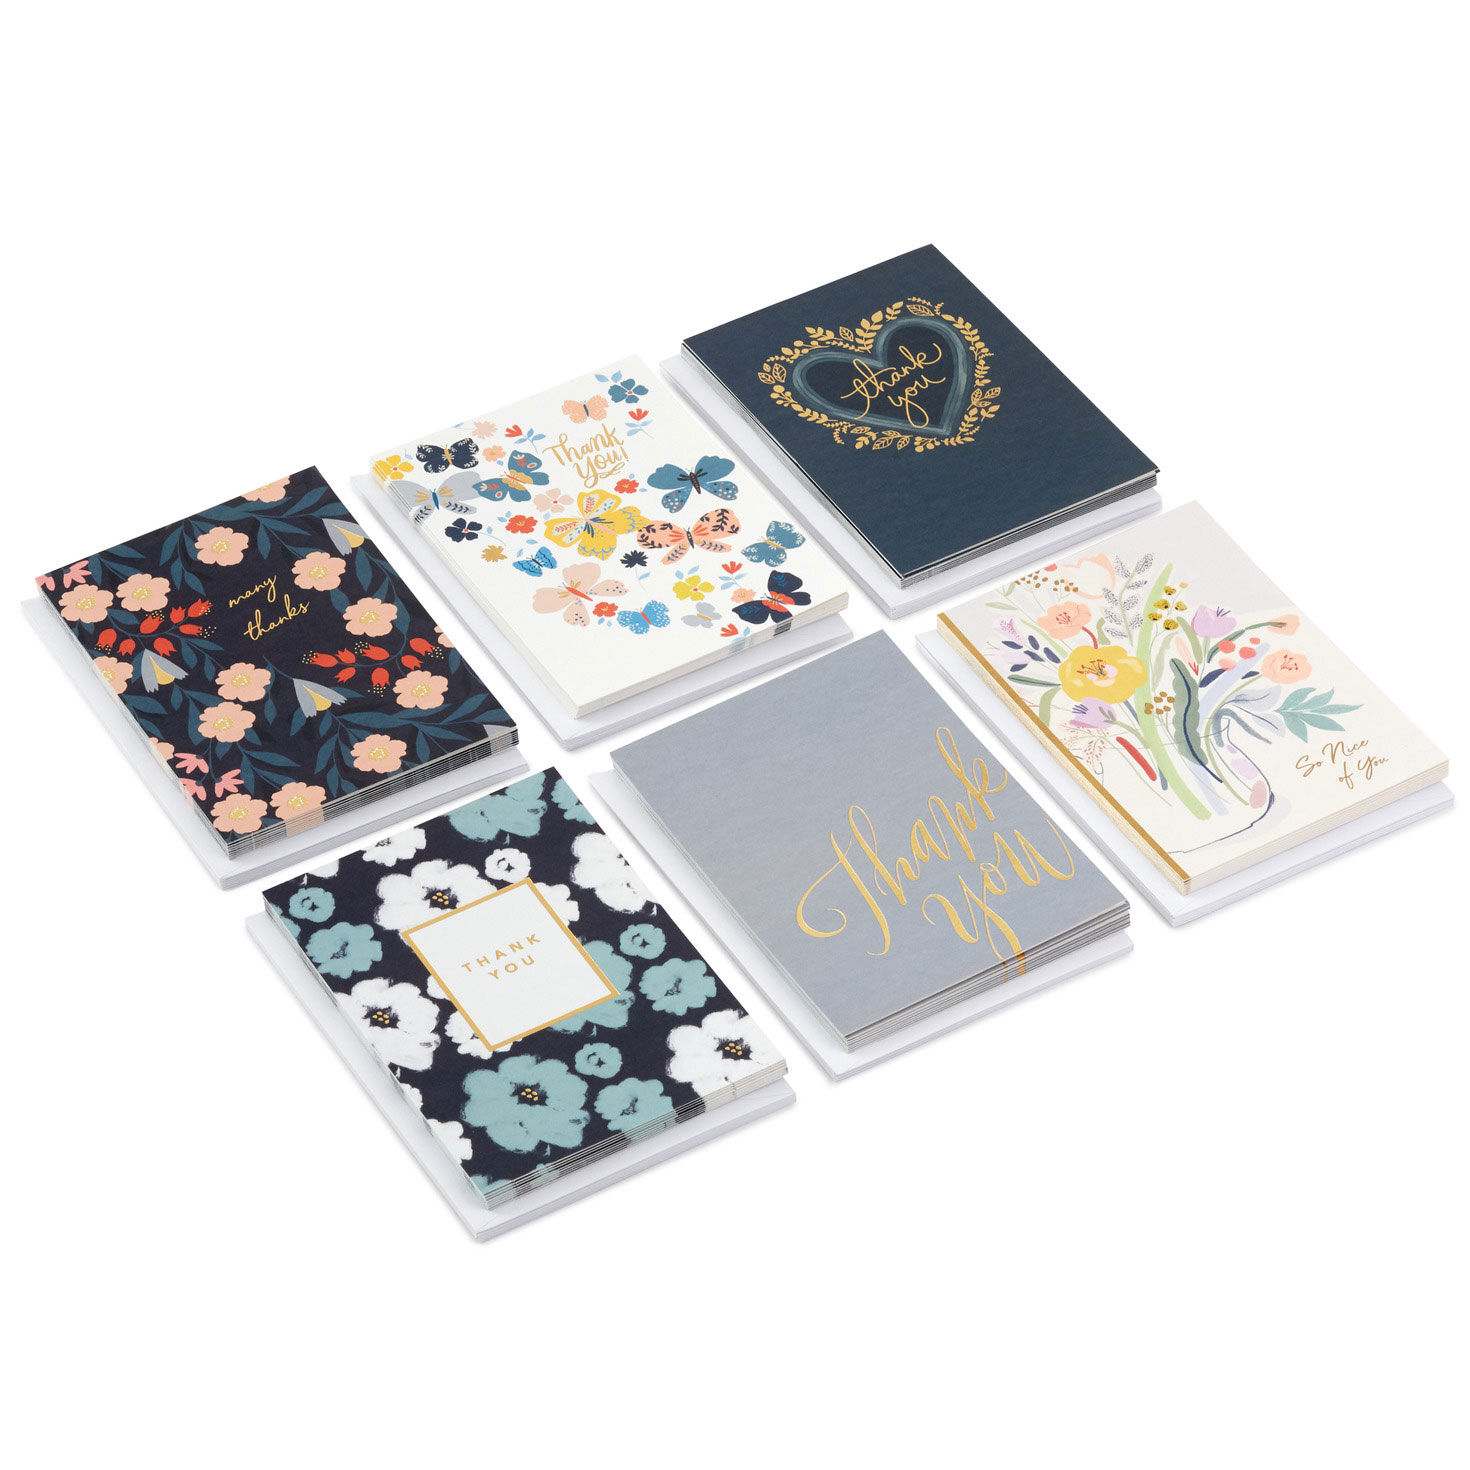 Elegant Florals Boxed Blank Thank-You Notes Assortment, Pack of 48 for only USD 12.99 | Hallmark